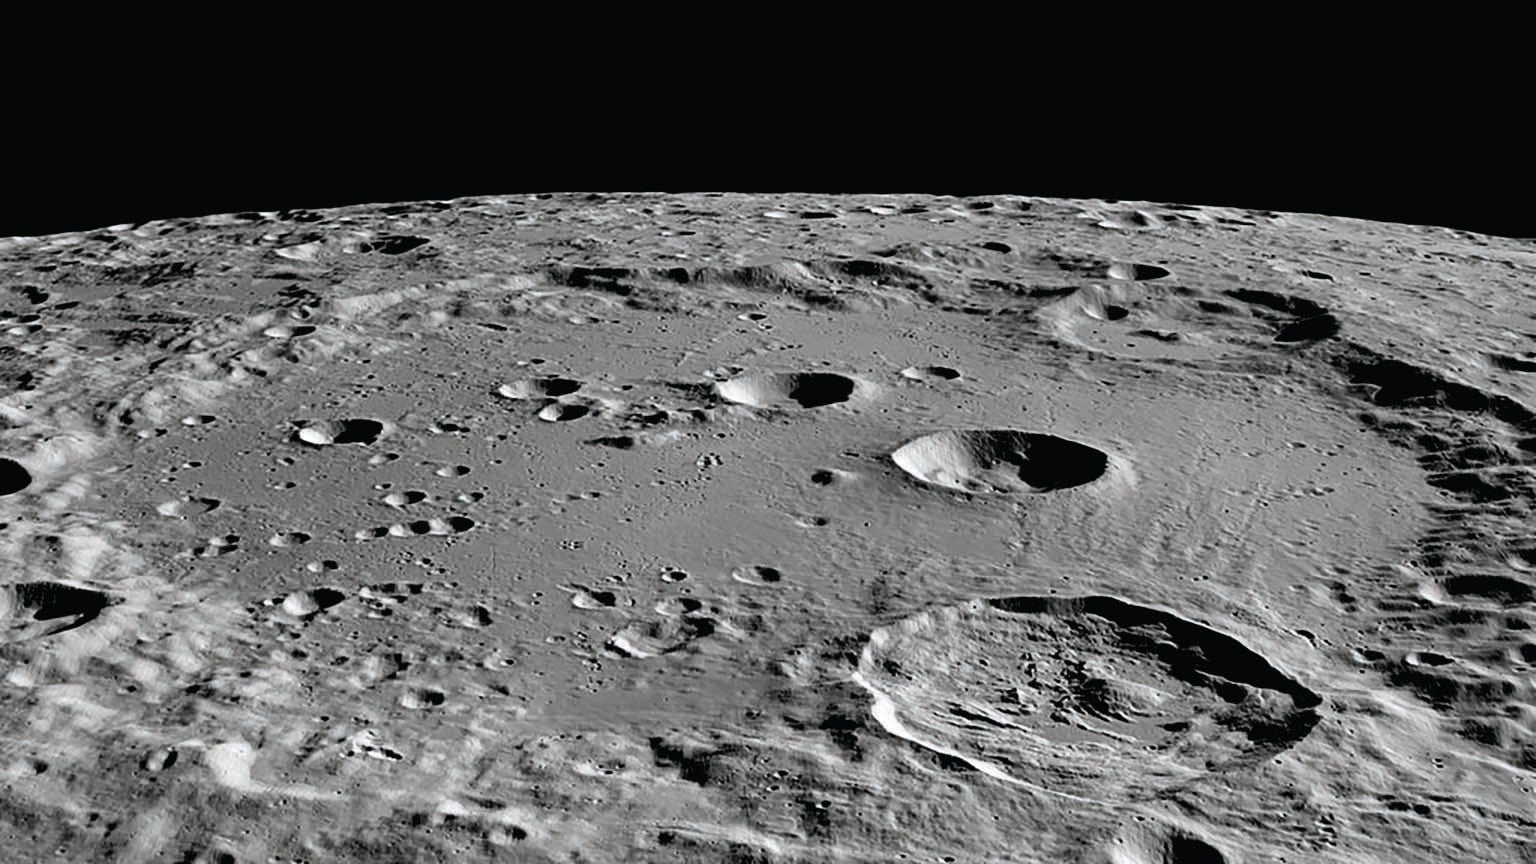 A close up view of the surface of Earth’s moon revealing craters, shown against a black background.